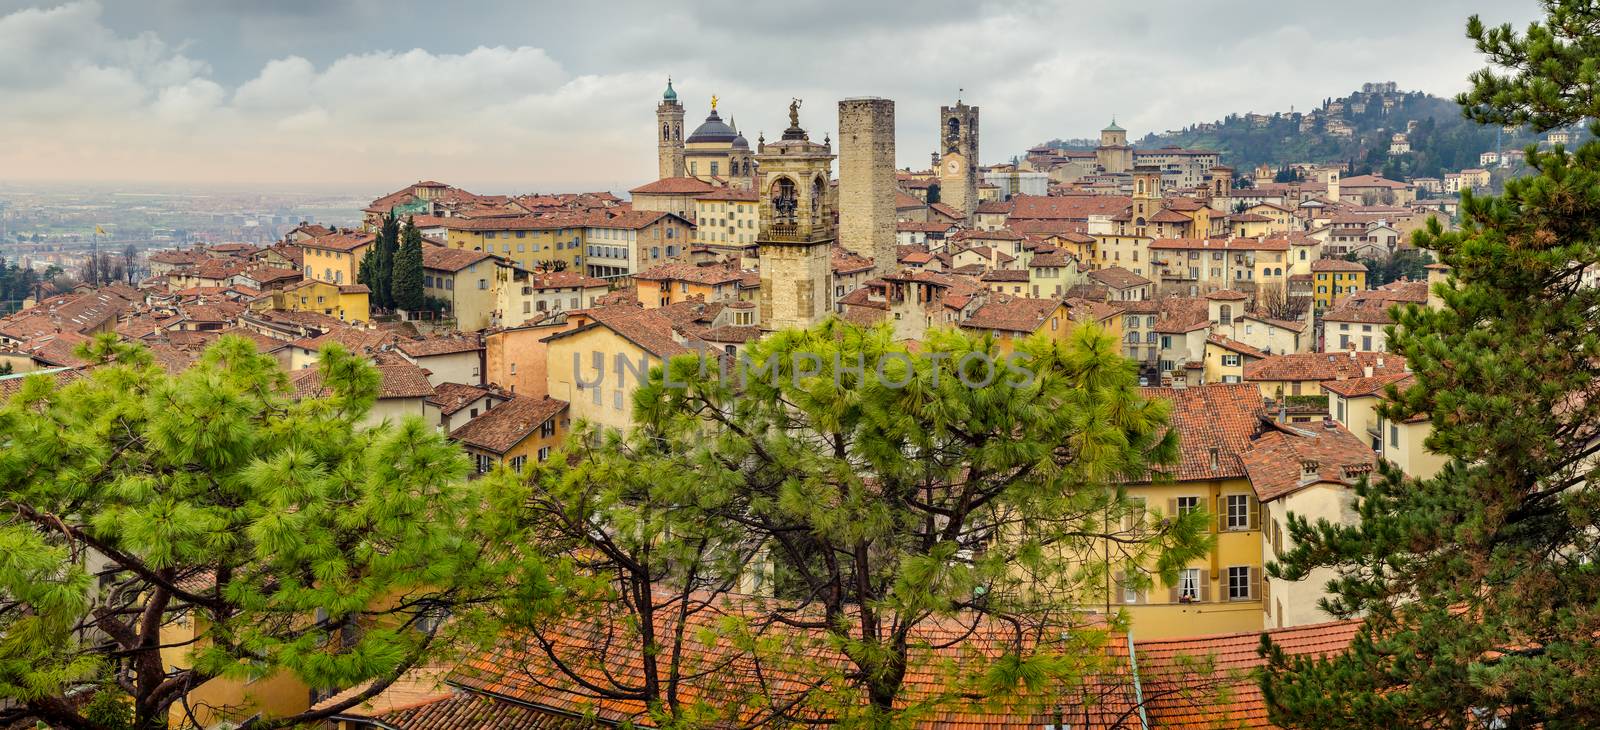 Panoramic cityscape view of Bergamo old town, Italy by martinm303